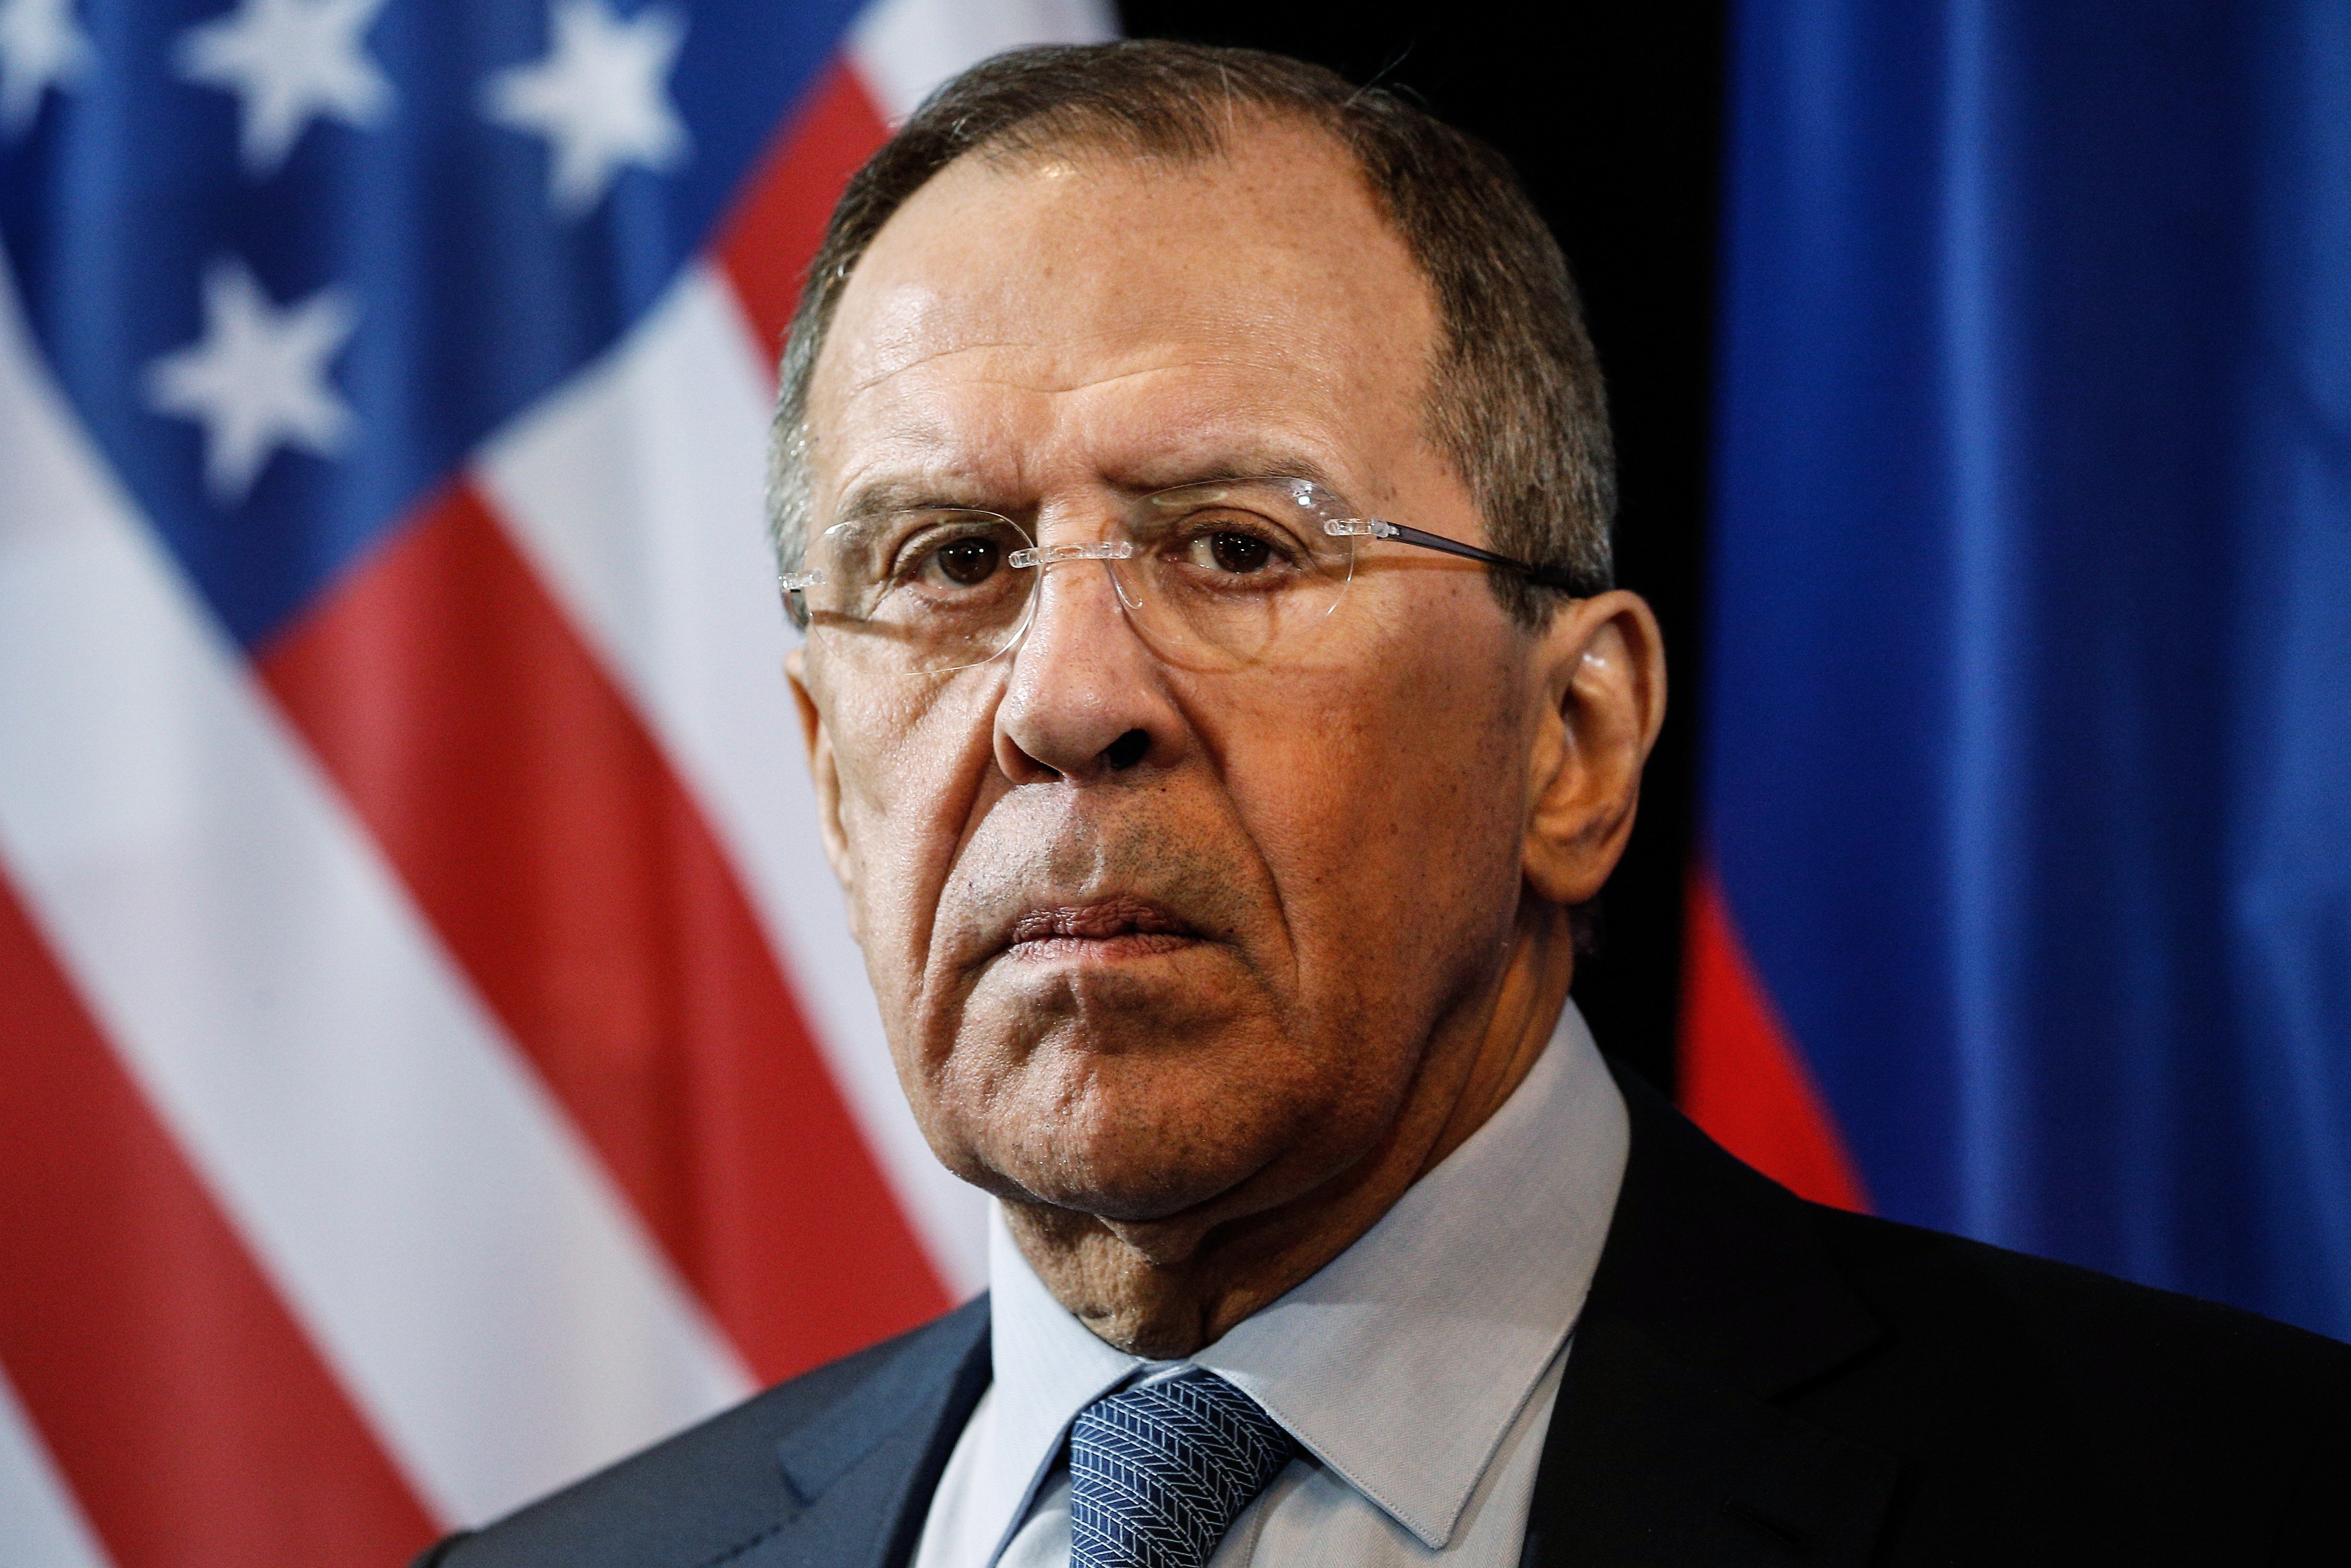 Russia's Foreign Minister Sergei Lavrov in a press conference following a meeting of the International Syria Support Group in Munich, Germany on Feb. 12, 2015. (Alexander Shcherbak—ITAR-TASS/Corbis)